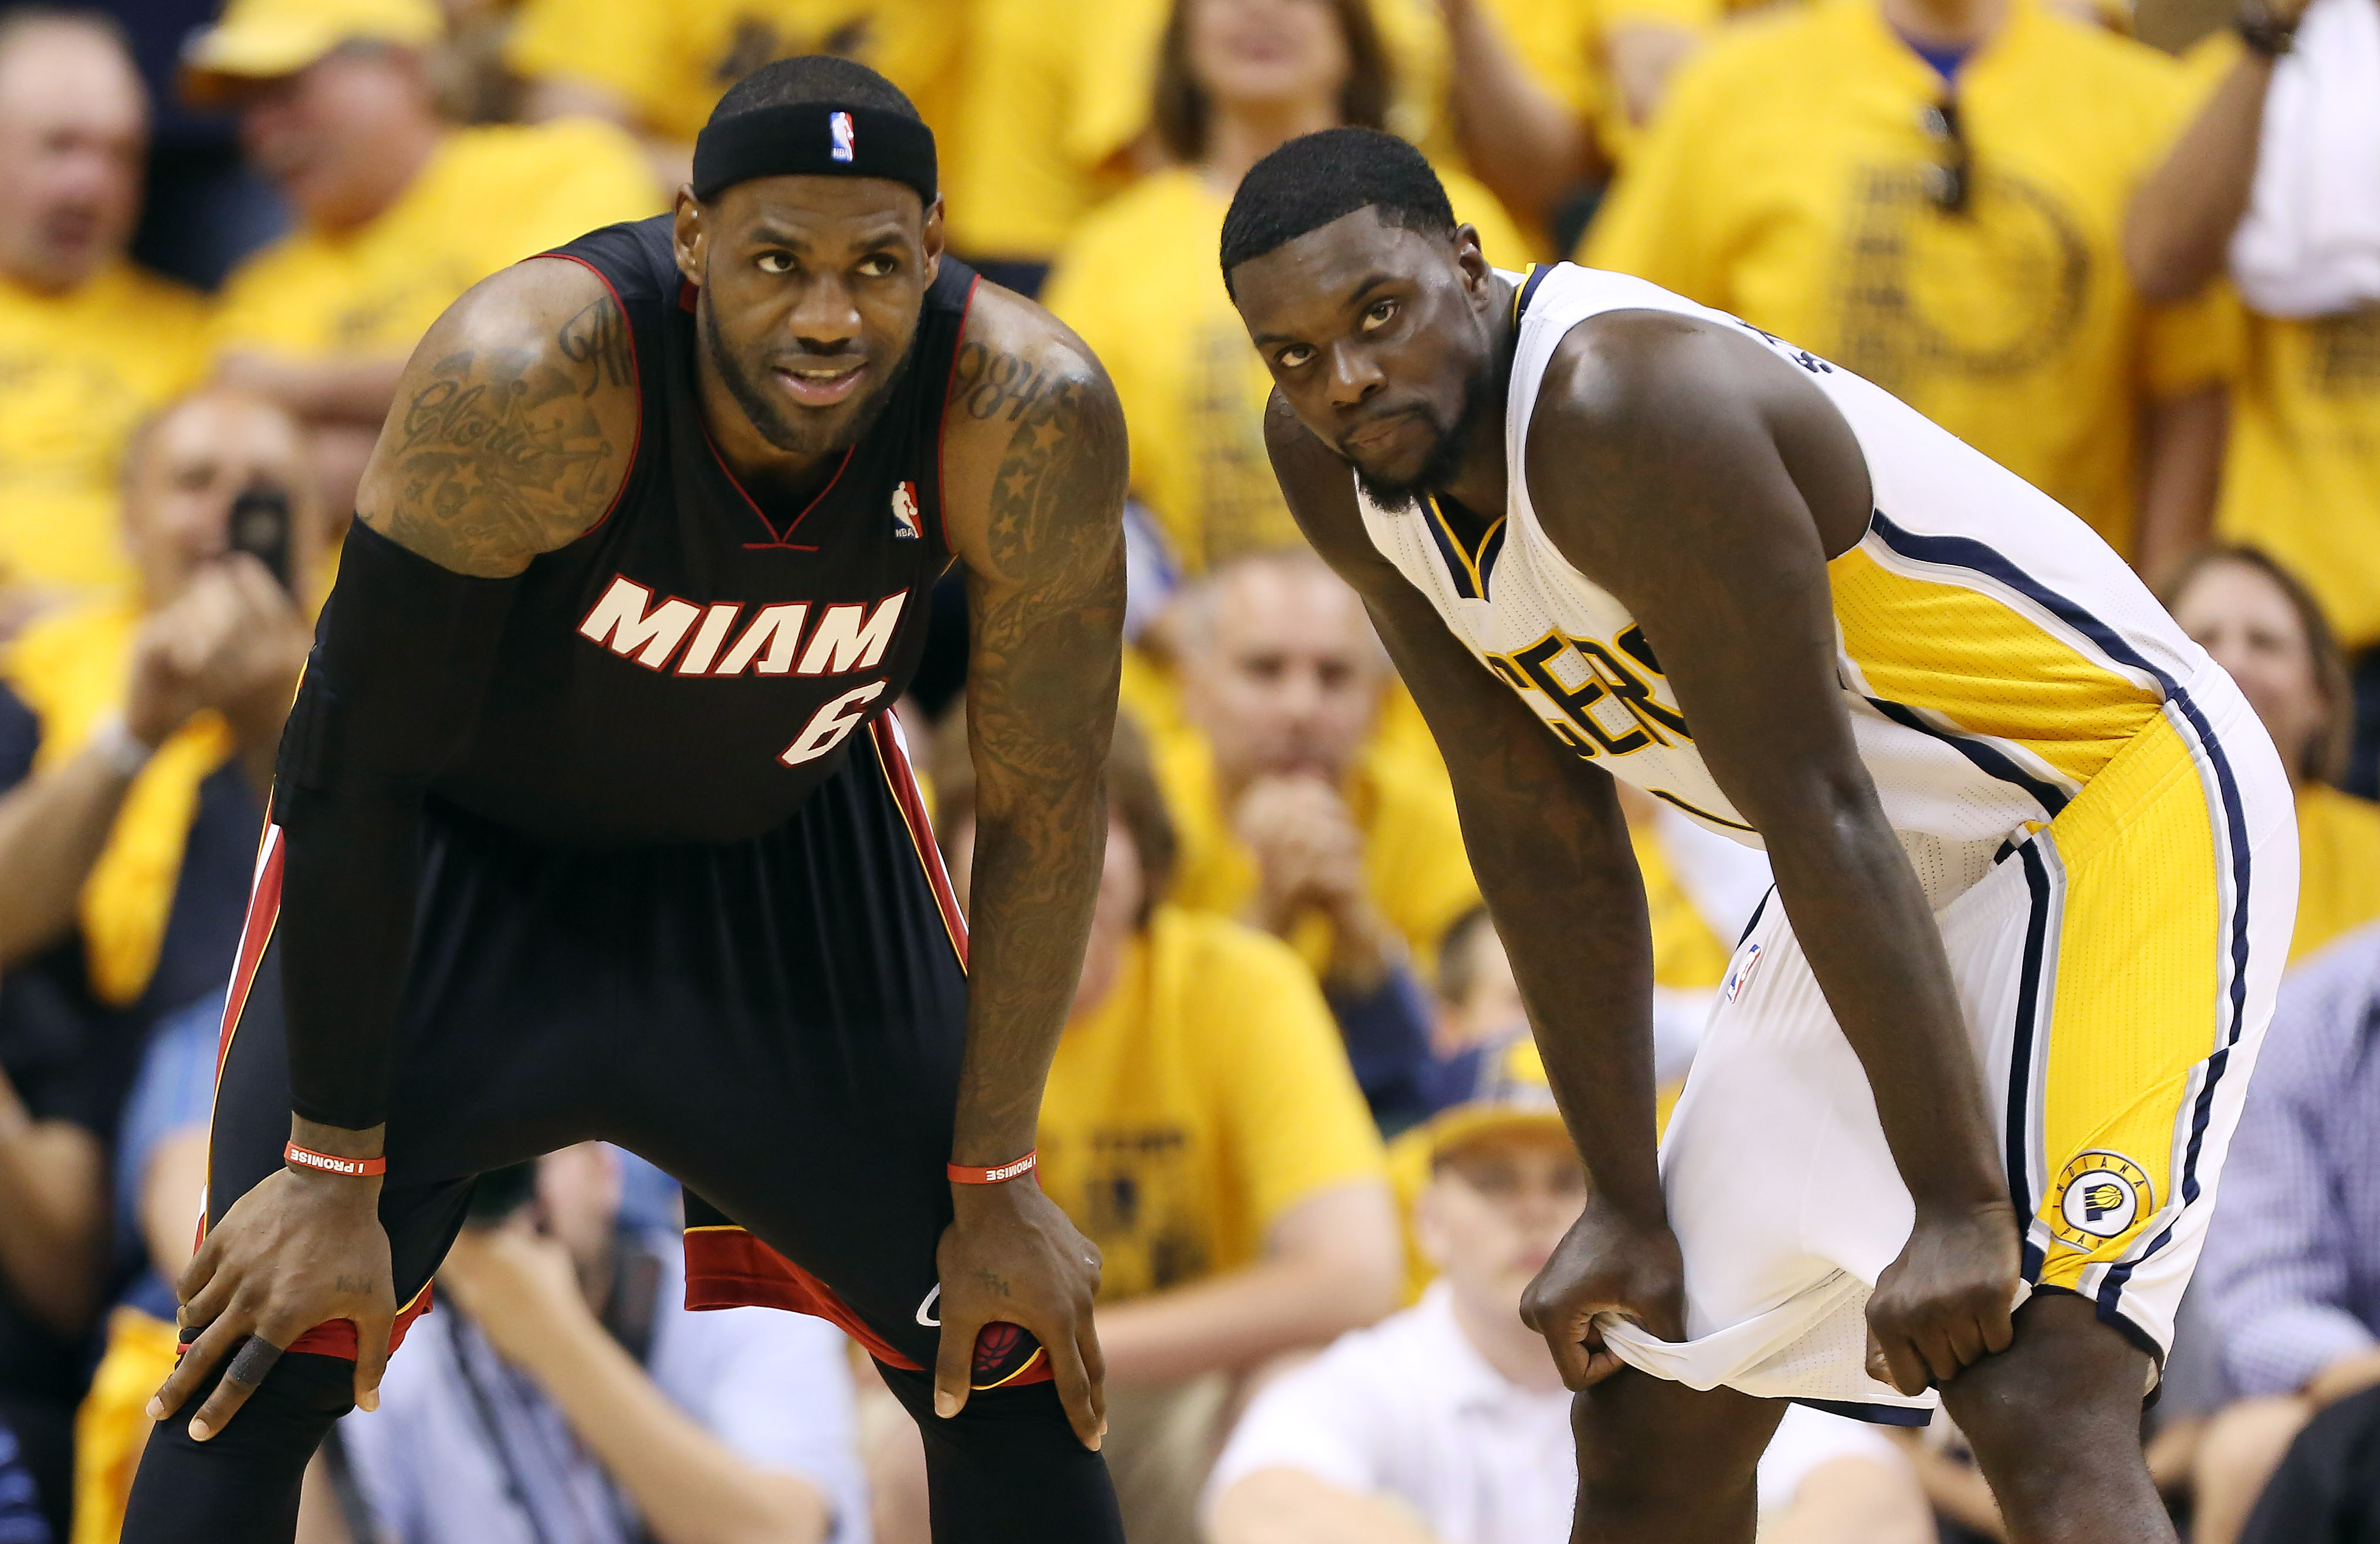 The 8 Most Important Things That Have Happened in the NBA Playoffs So Far